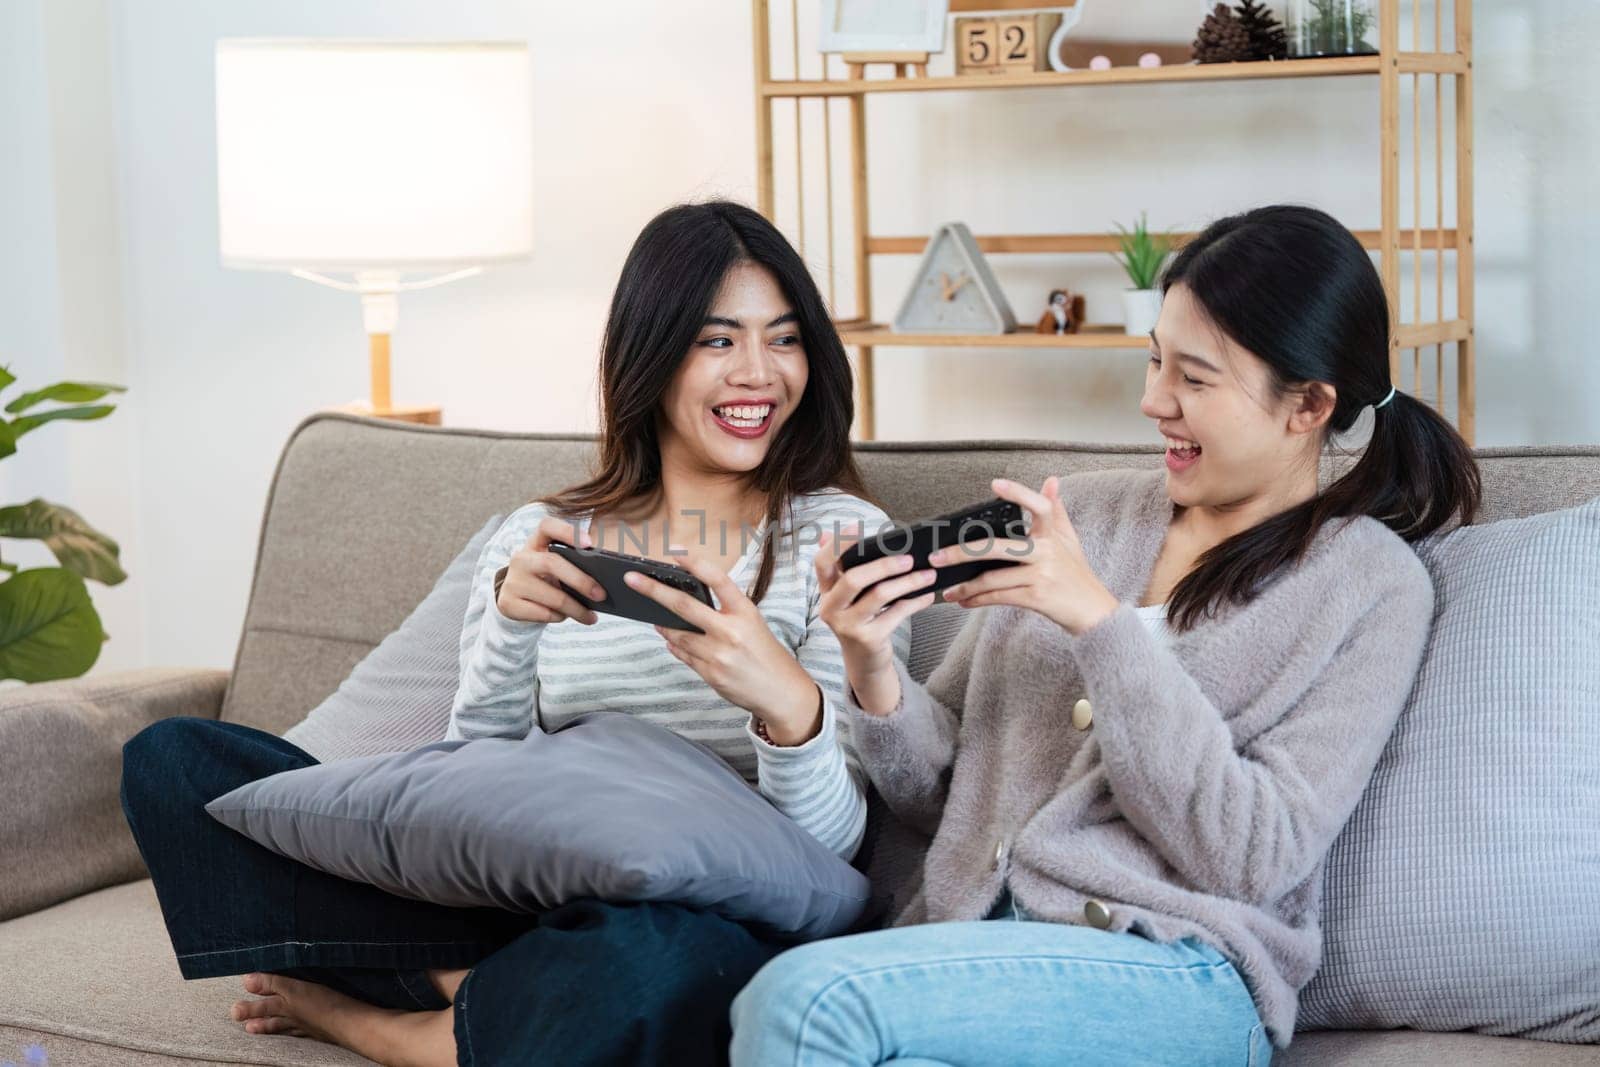 Happy woman lesbian gay lgbt couple enjoying fun gaming session on the couch at home.